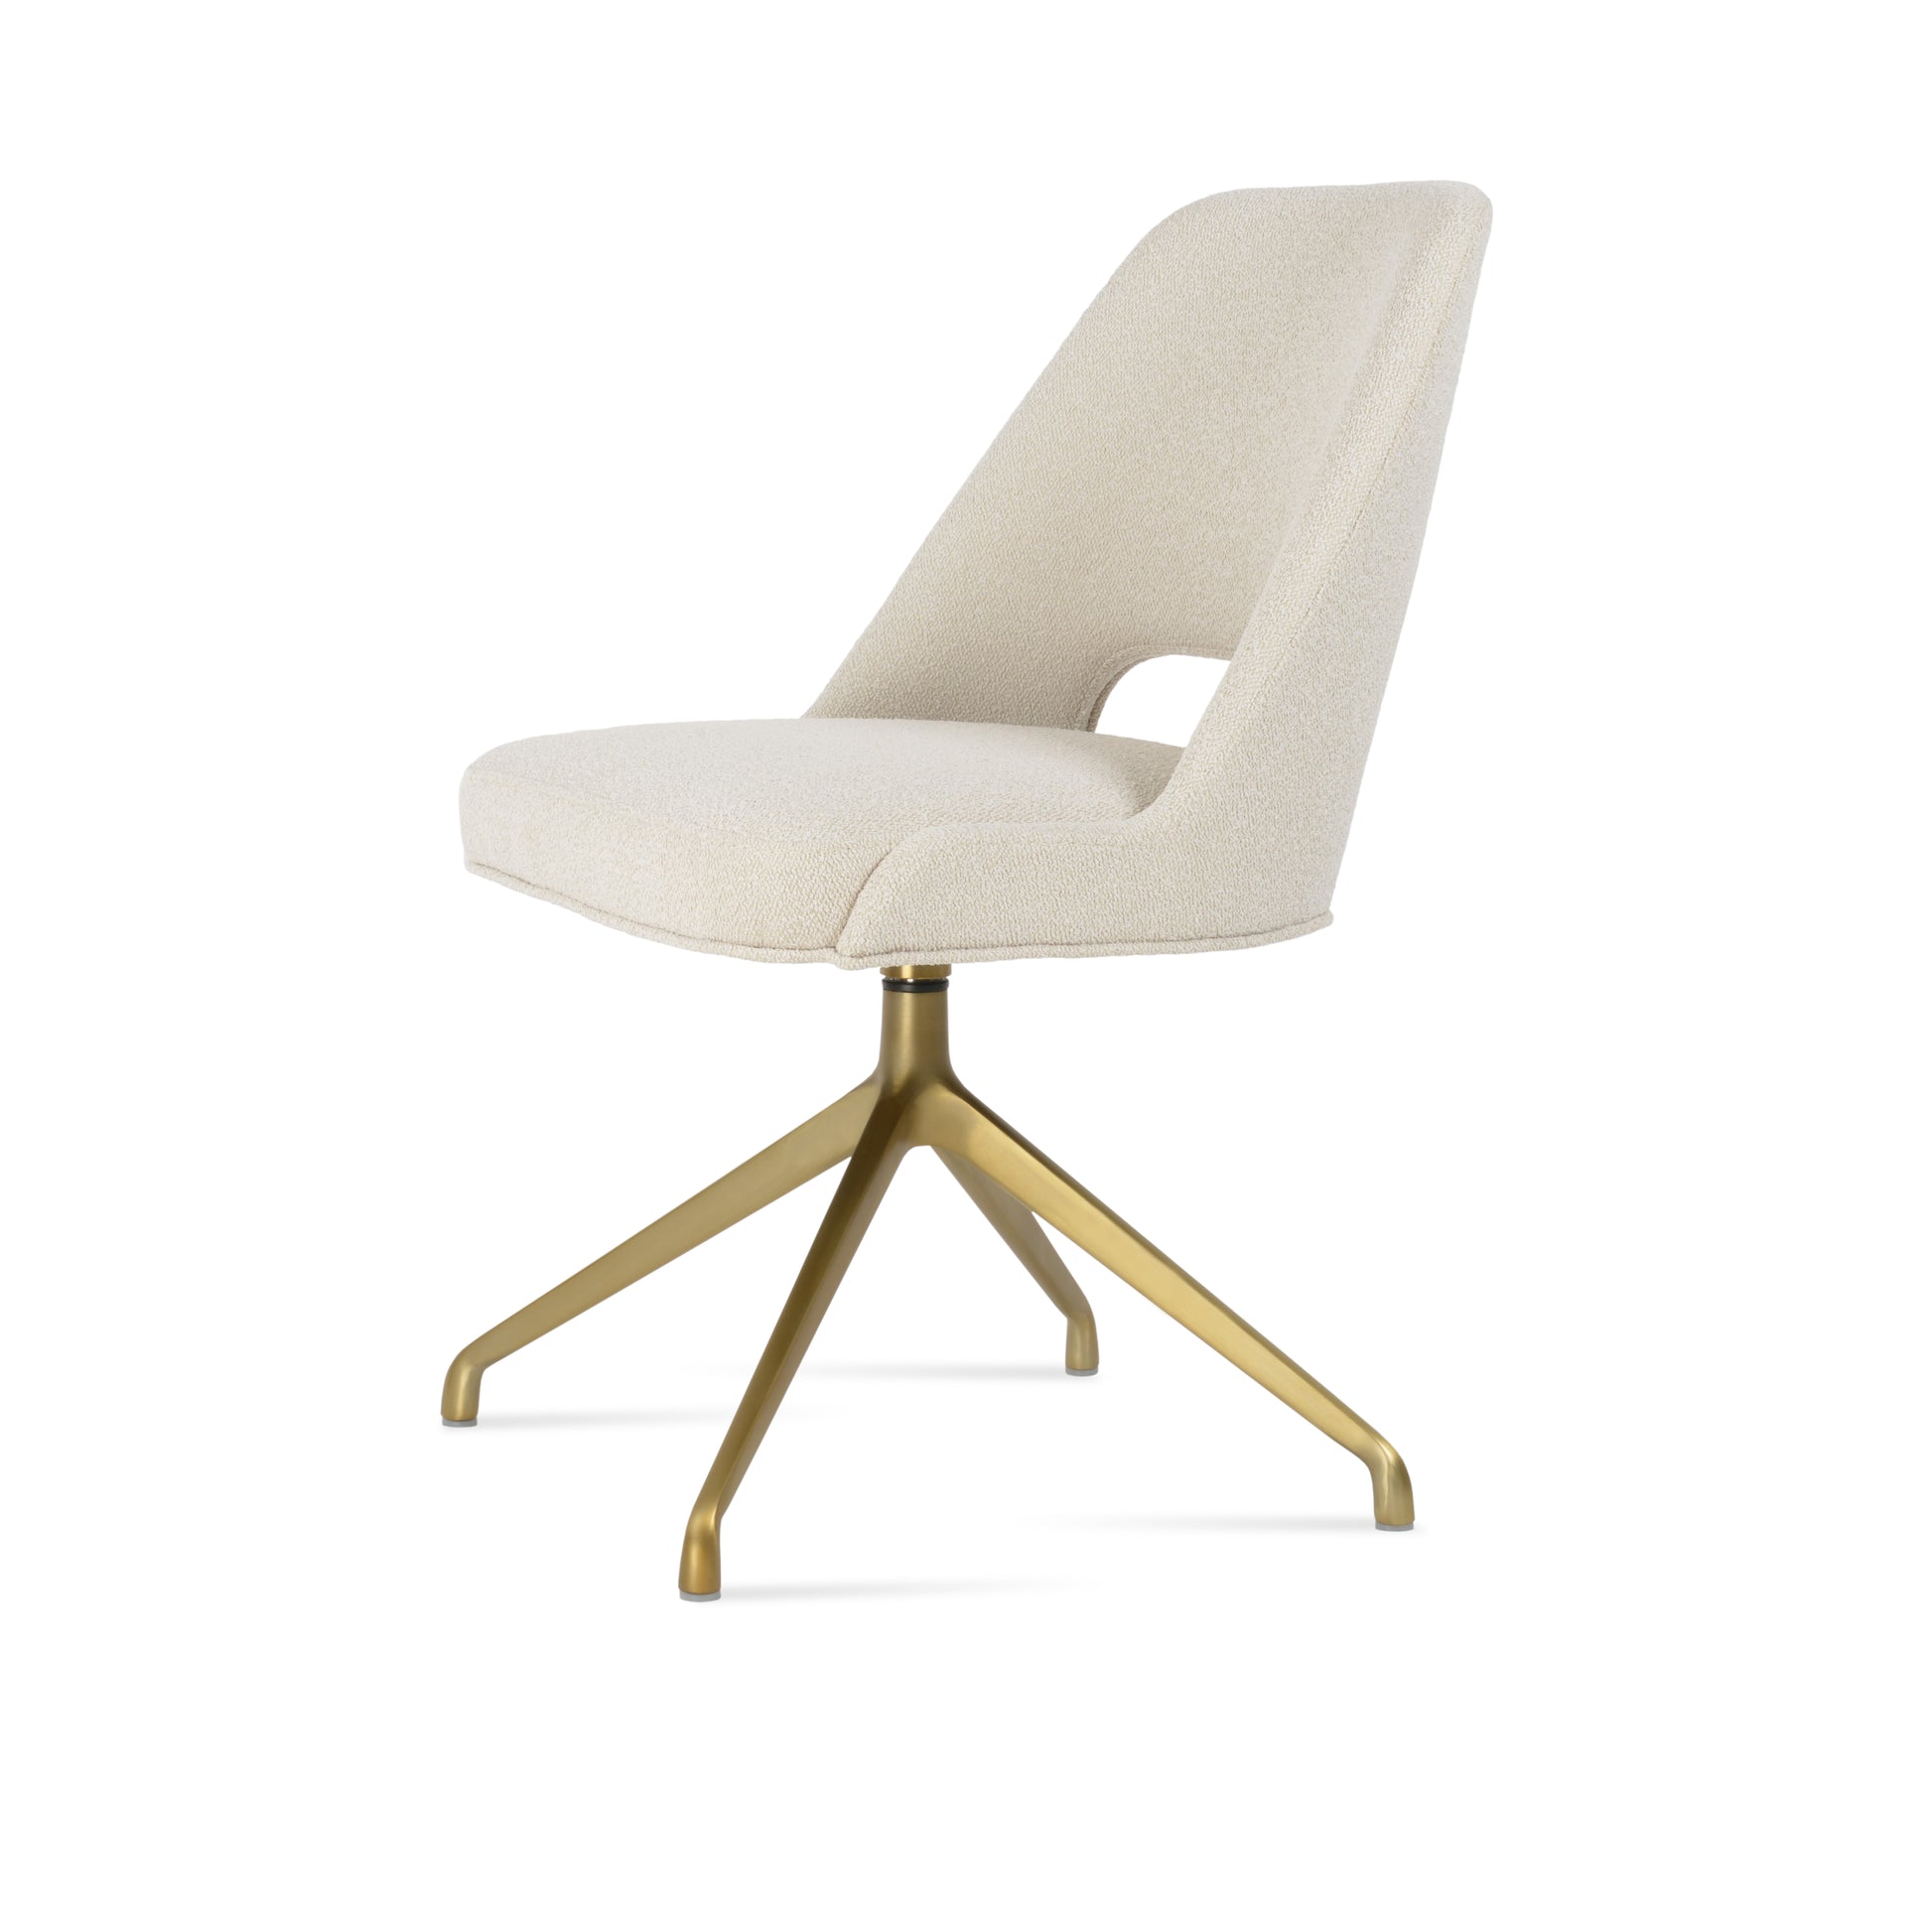 Comfortable Marash Chair - Off White Fabroxc with Brass Spider Leg